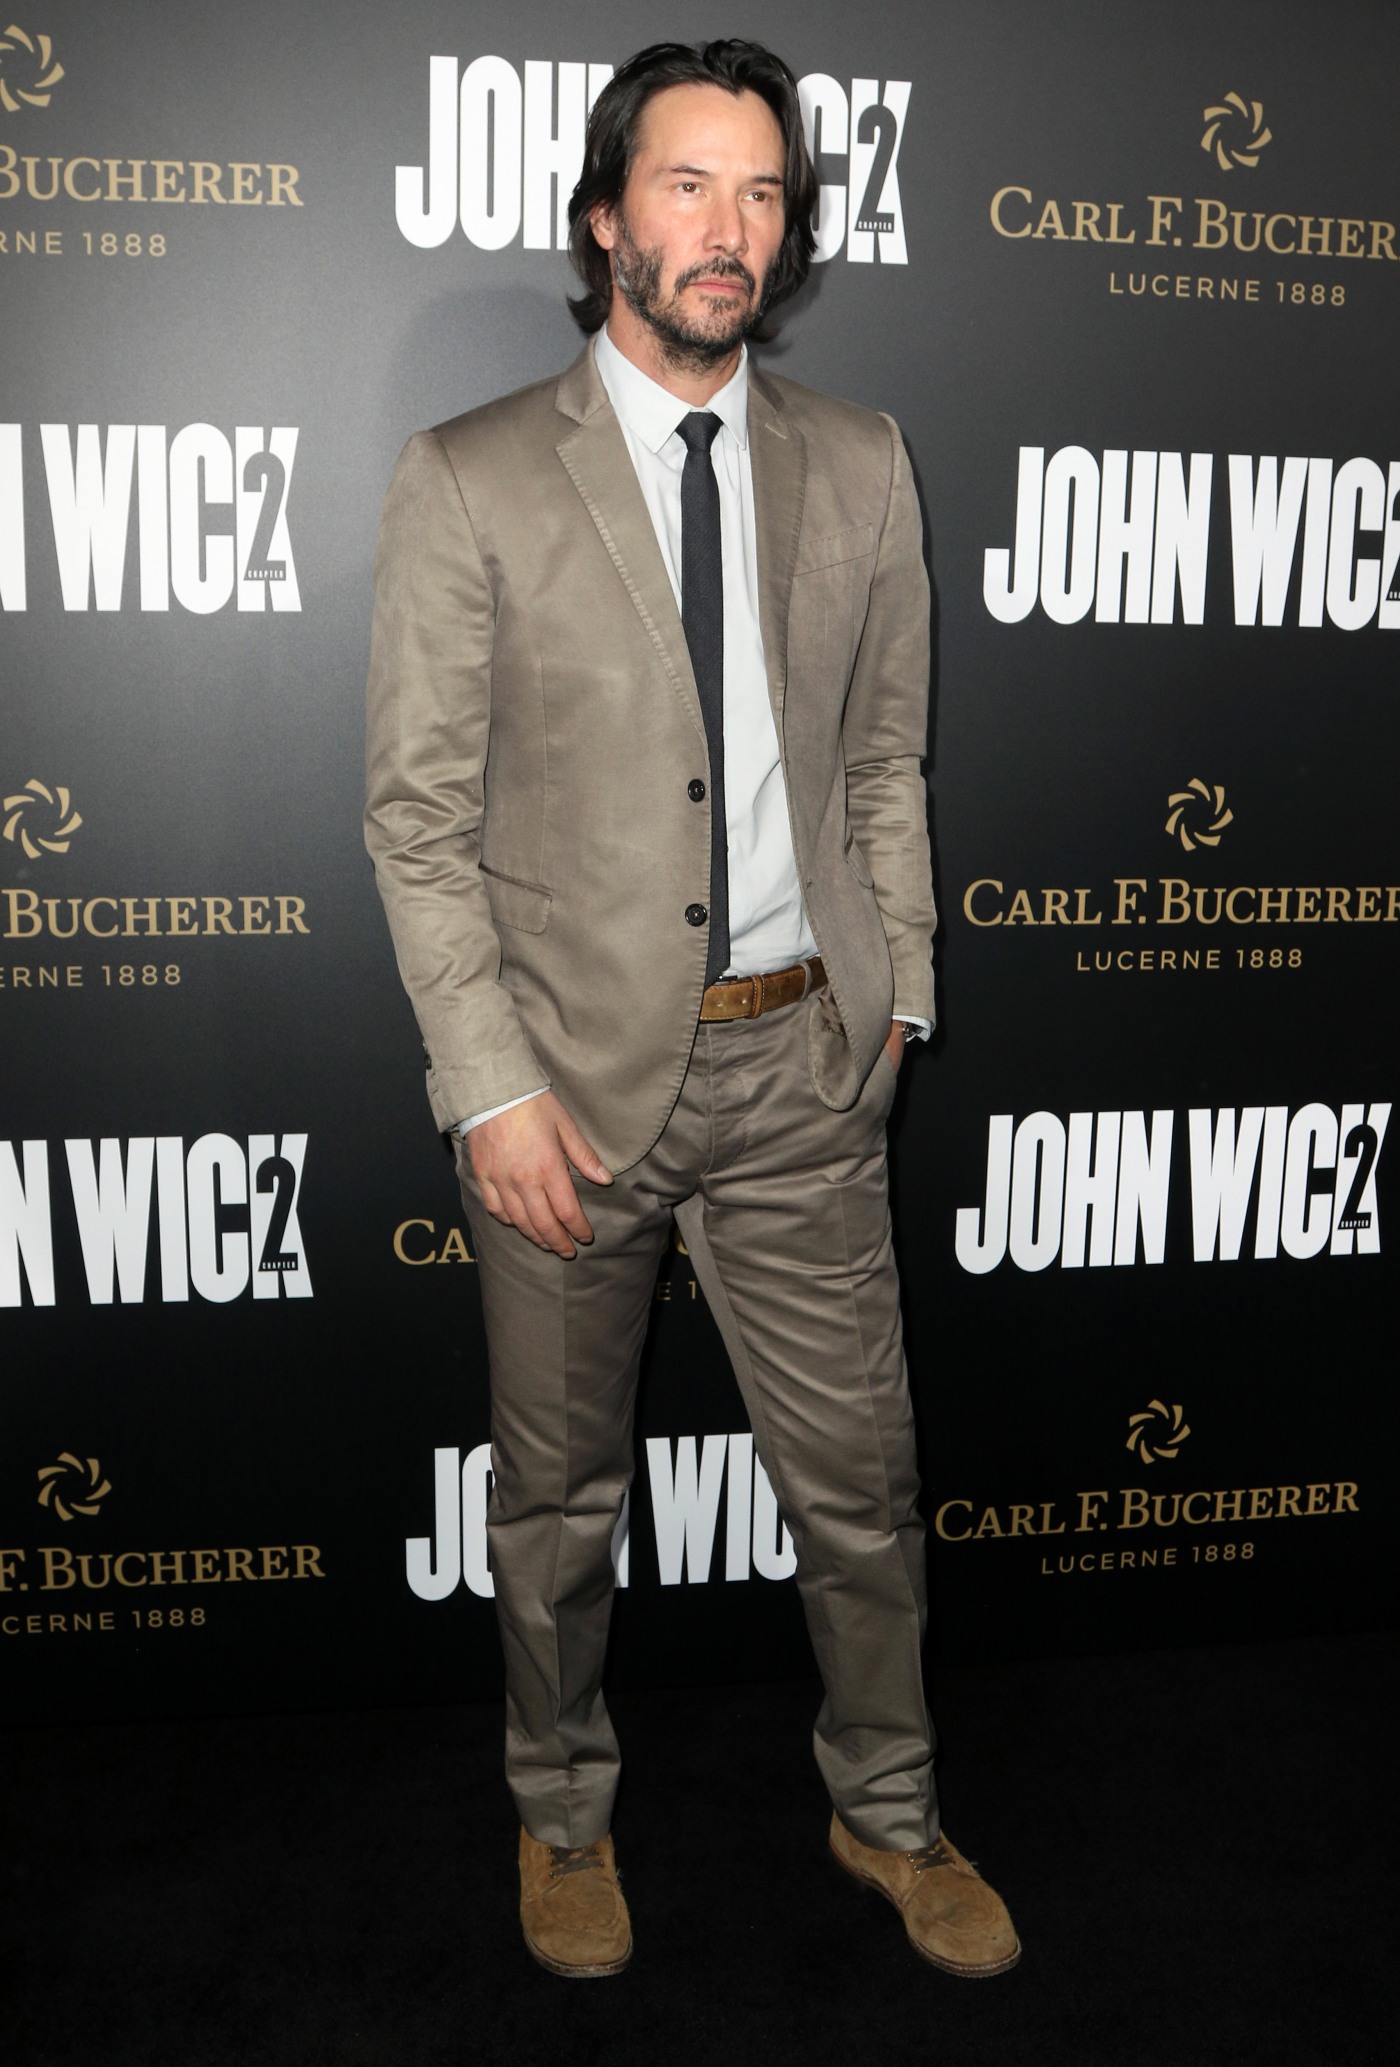 Keanu Reeves and Laurence Fishburne at John Wick: Chapter2 Premiere in Hollywood